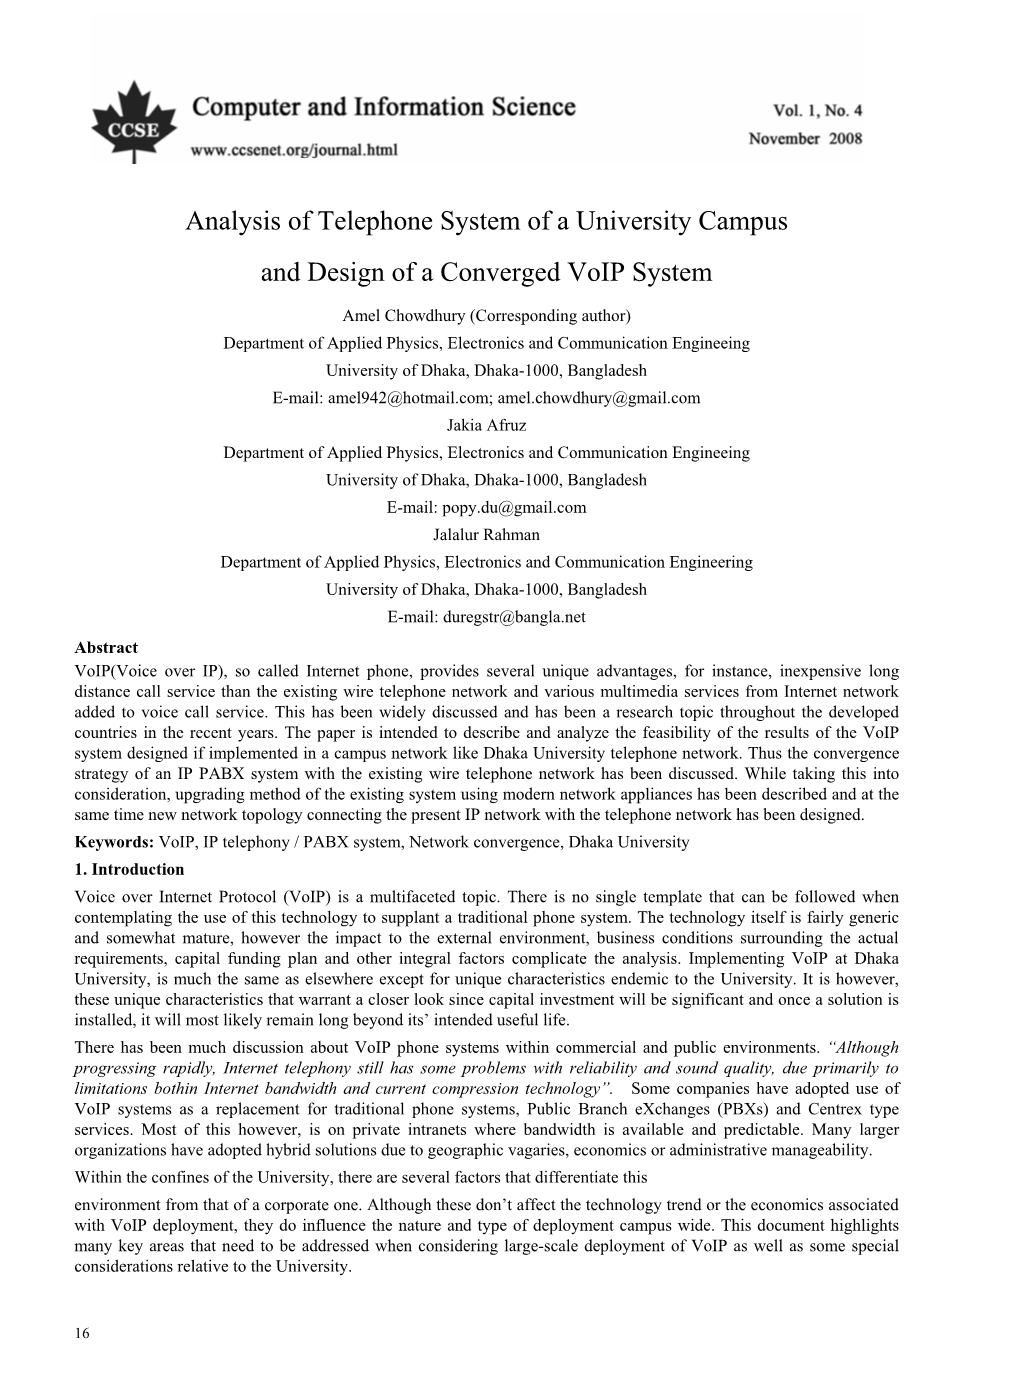 Analysis of Telephone System of a University Campus and Design of a Converged Voip System